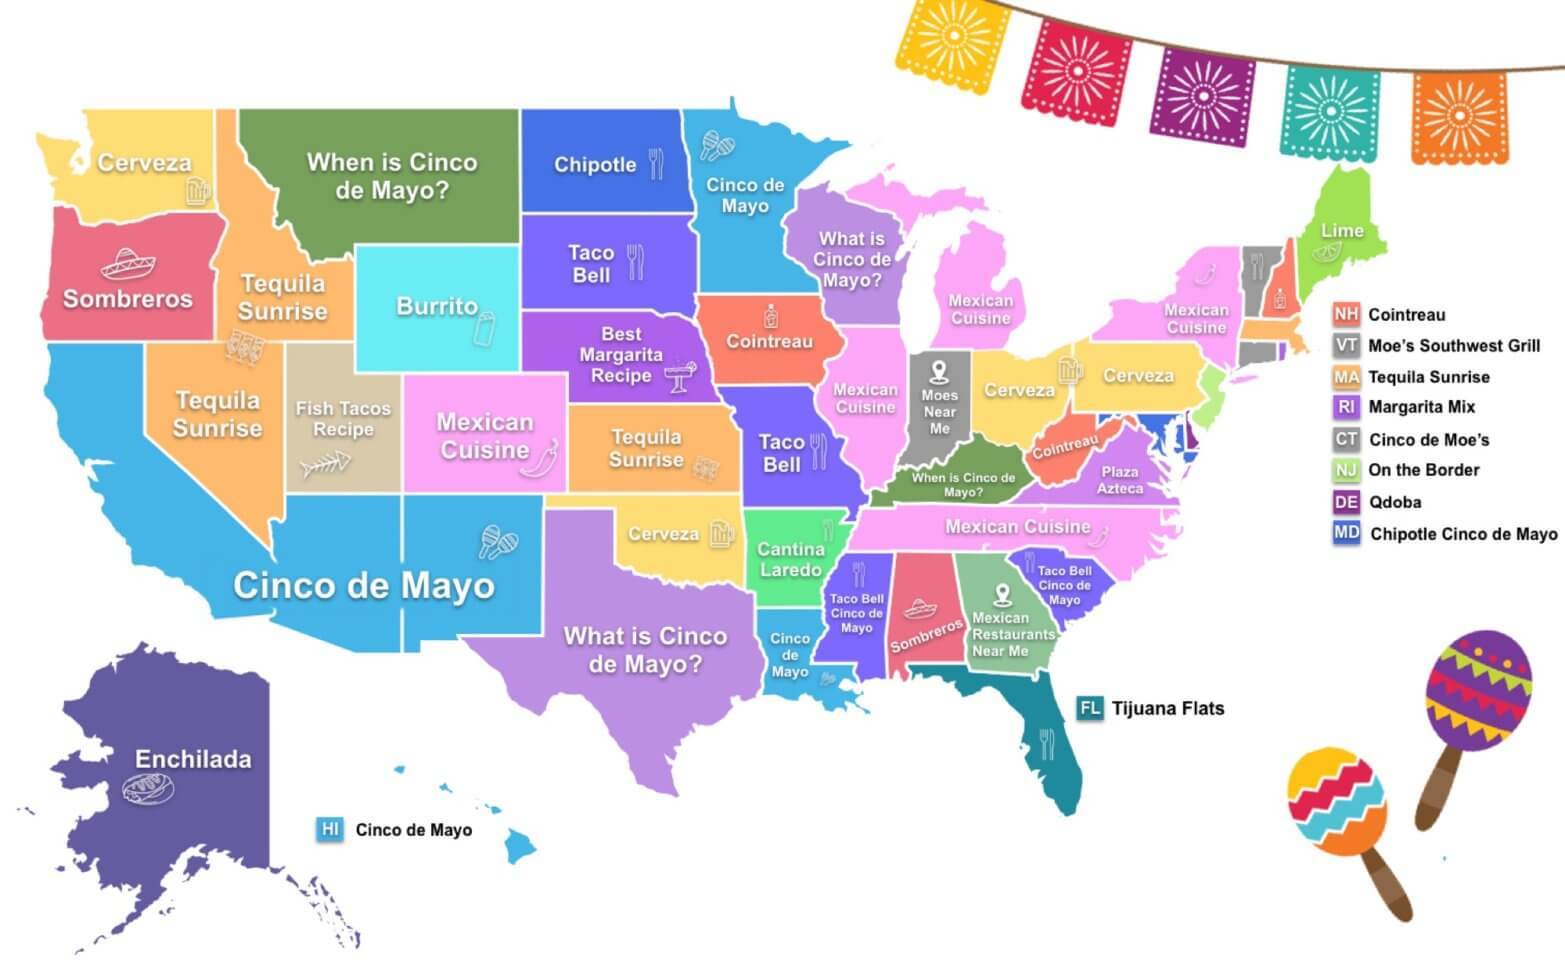 What does your state want to know about Cinco de Mayo?